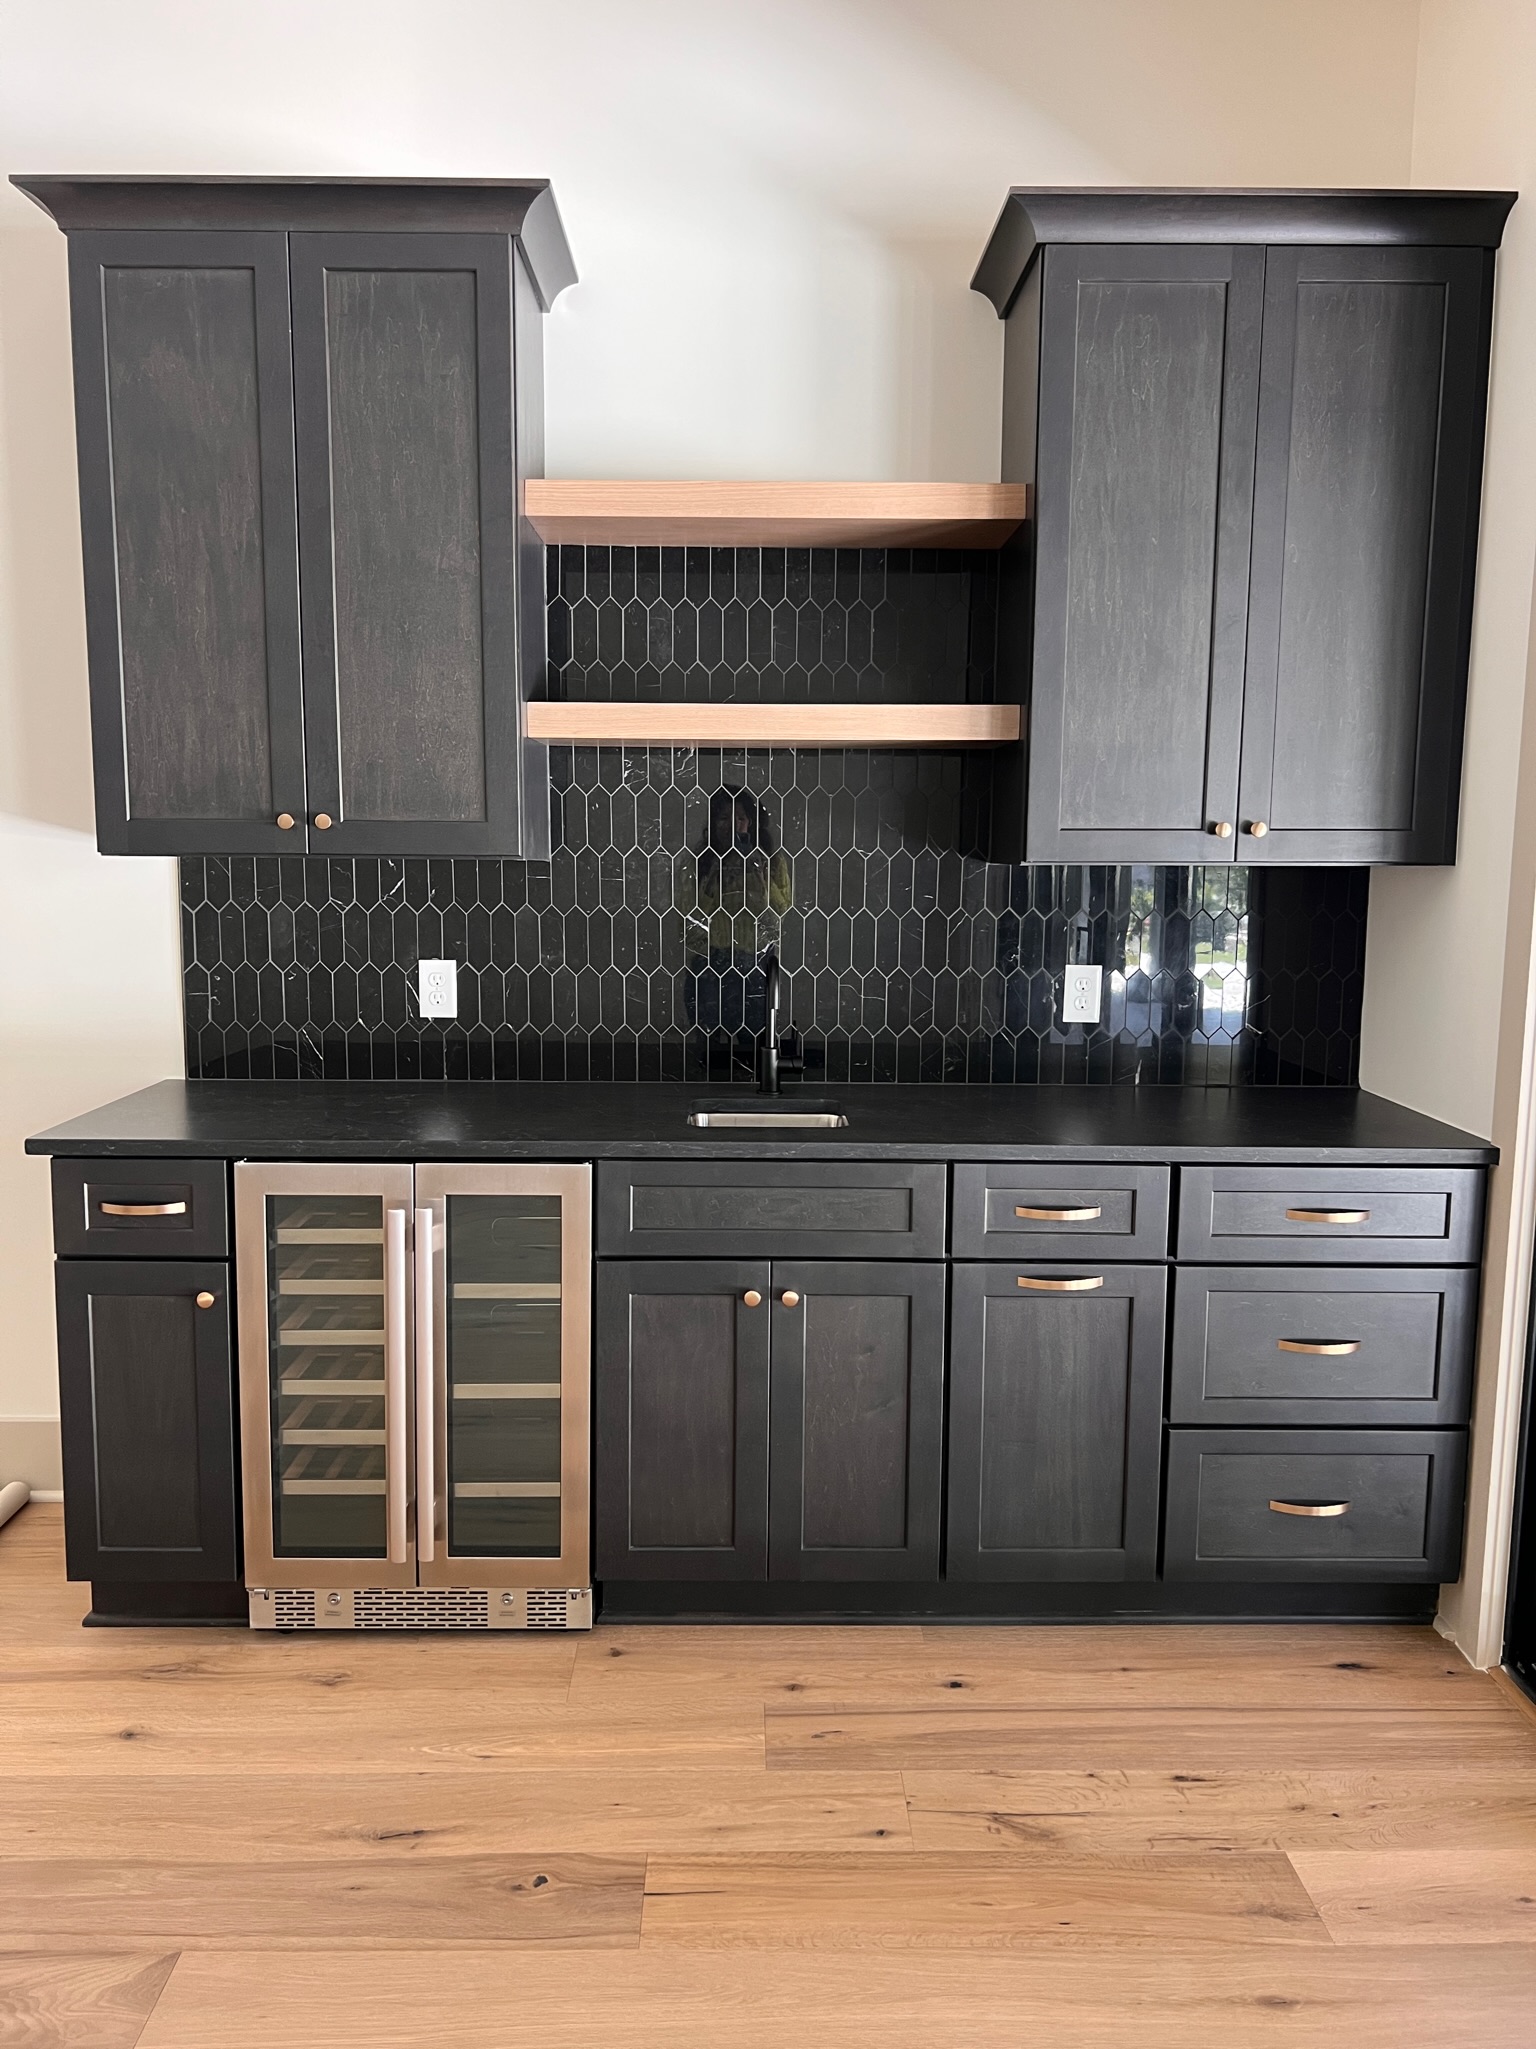 These beautiful dark tiles make the perfect backsplash for the wet bar. The wet bar features dark wood cabinets and lighter wood open shelving near the top.